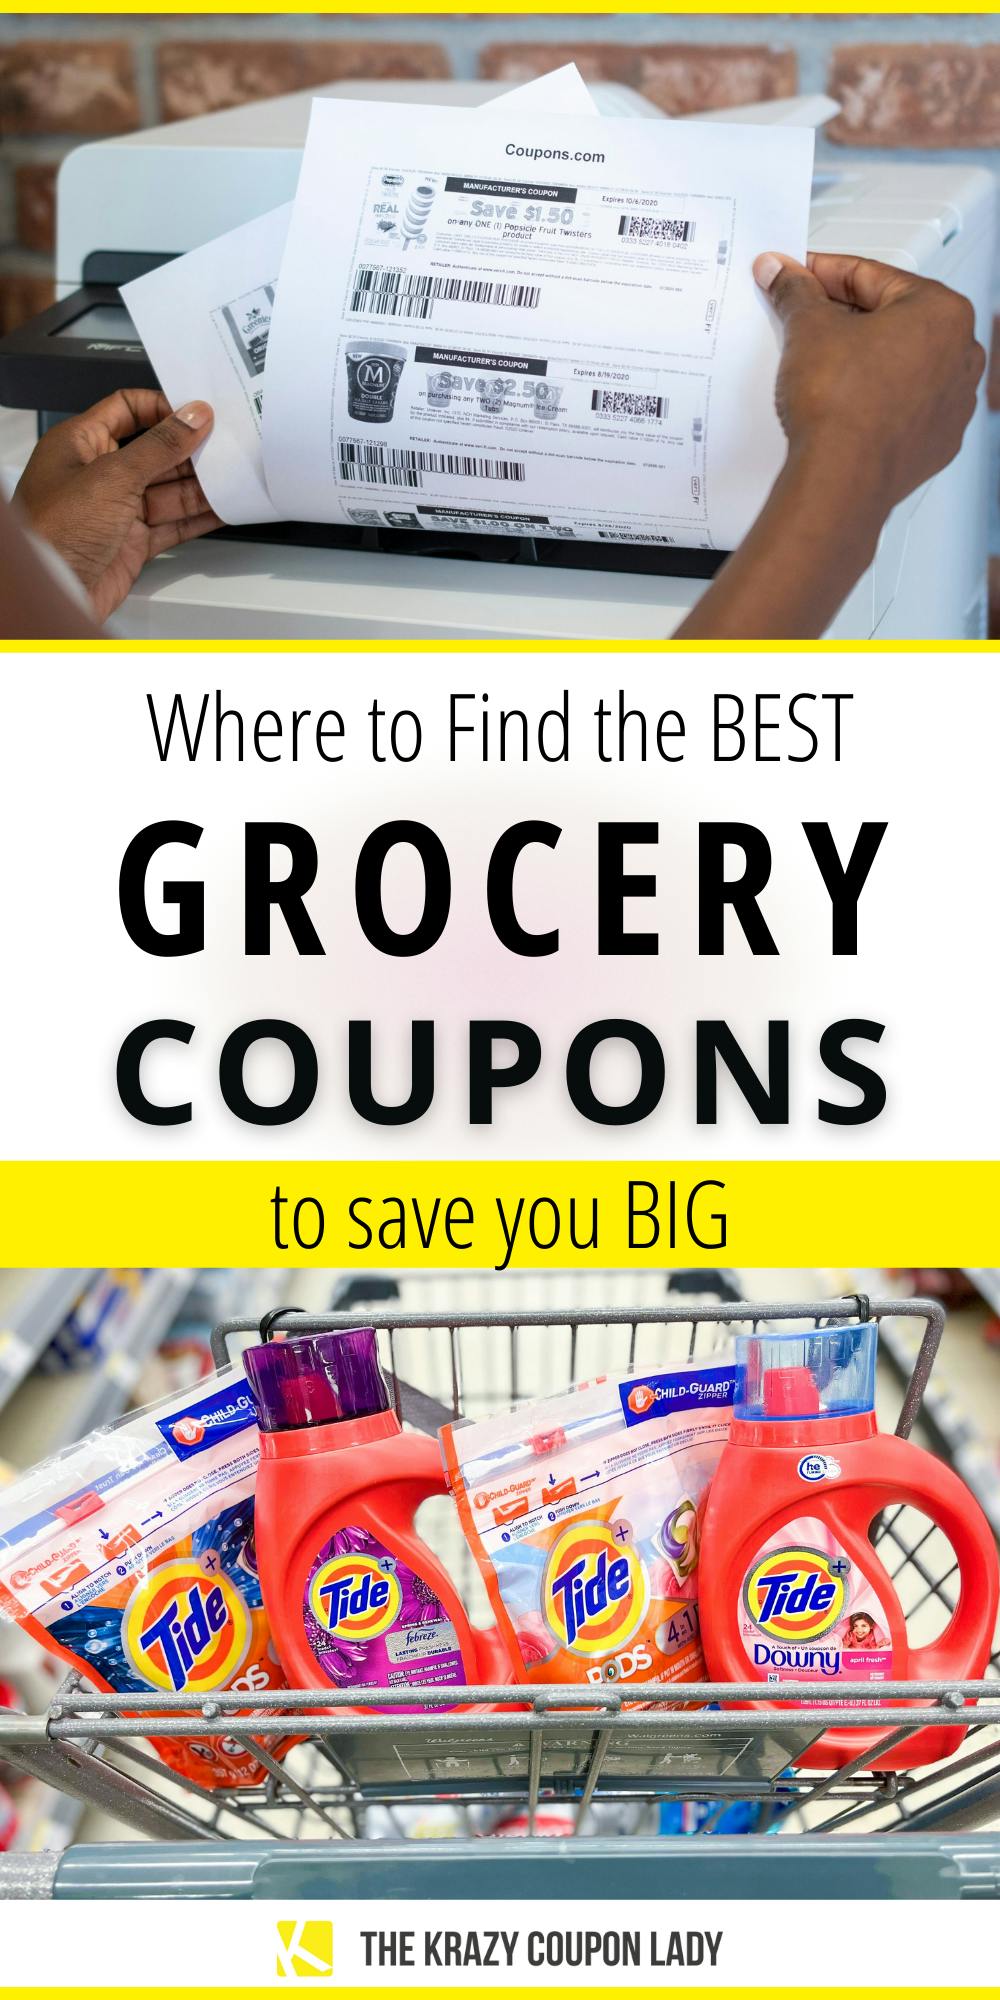 Where to Find the Free Grocery Coupons to Save You Big